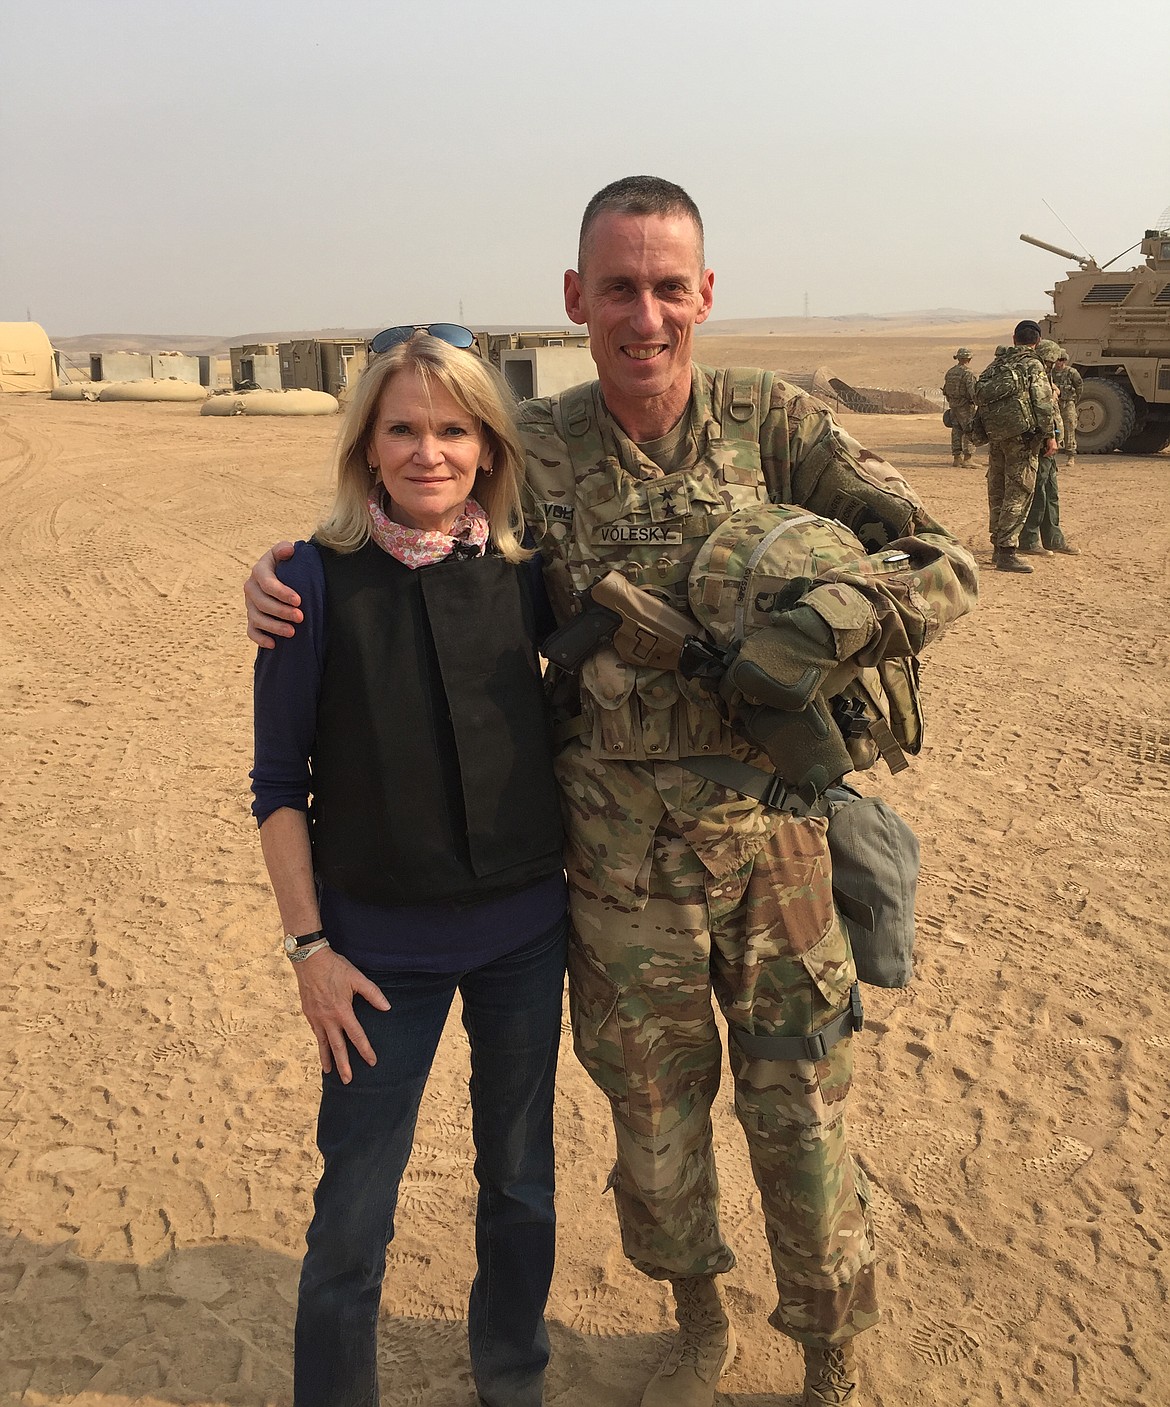 War correspondent for ABC Martha Raddatz stands with Lt. Gen Gary Volesky in northern Iraq in 2016. Raddatz has covered national security, foreign policy and politics for decades, reporting from the Pentagon, the State Department, the White House and conflict zones around the world. She'll be speaking at The Coeur d'Alene Resort on Oct. 11. (Courtesy photo)